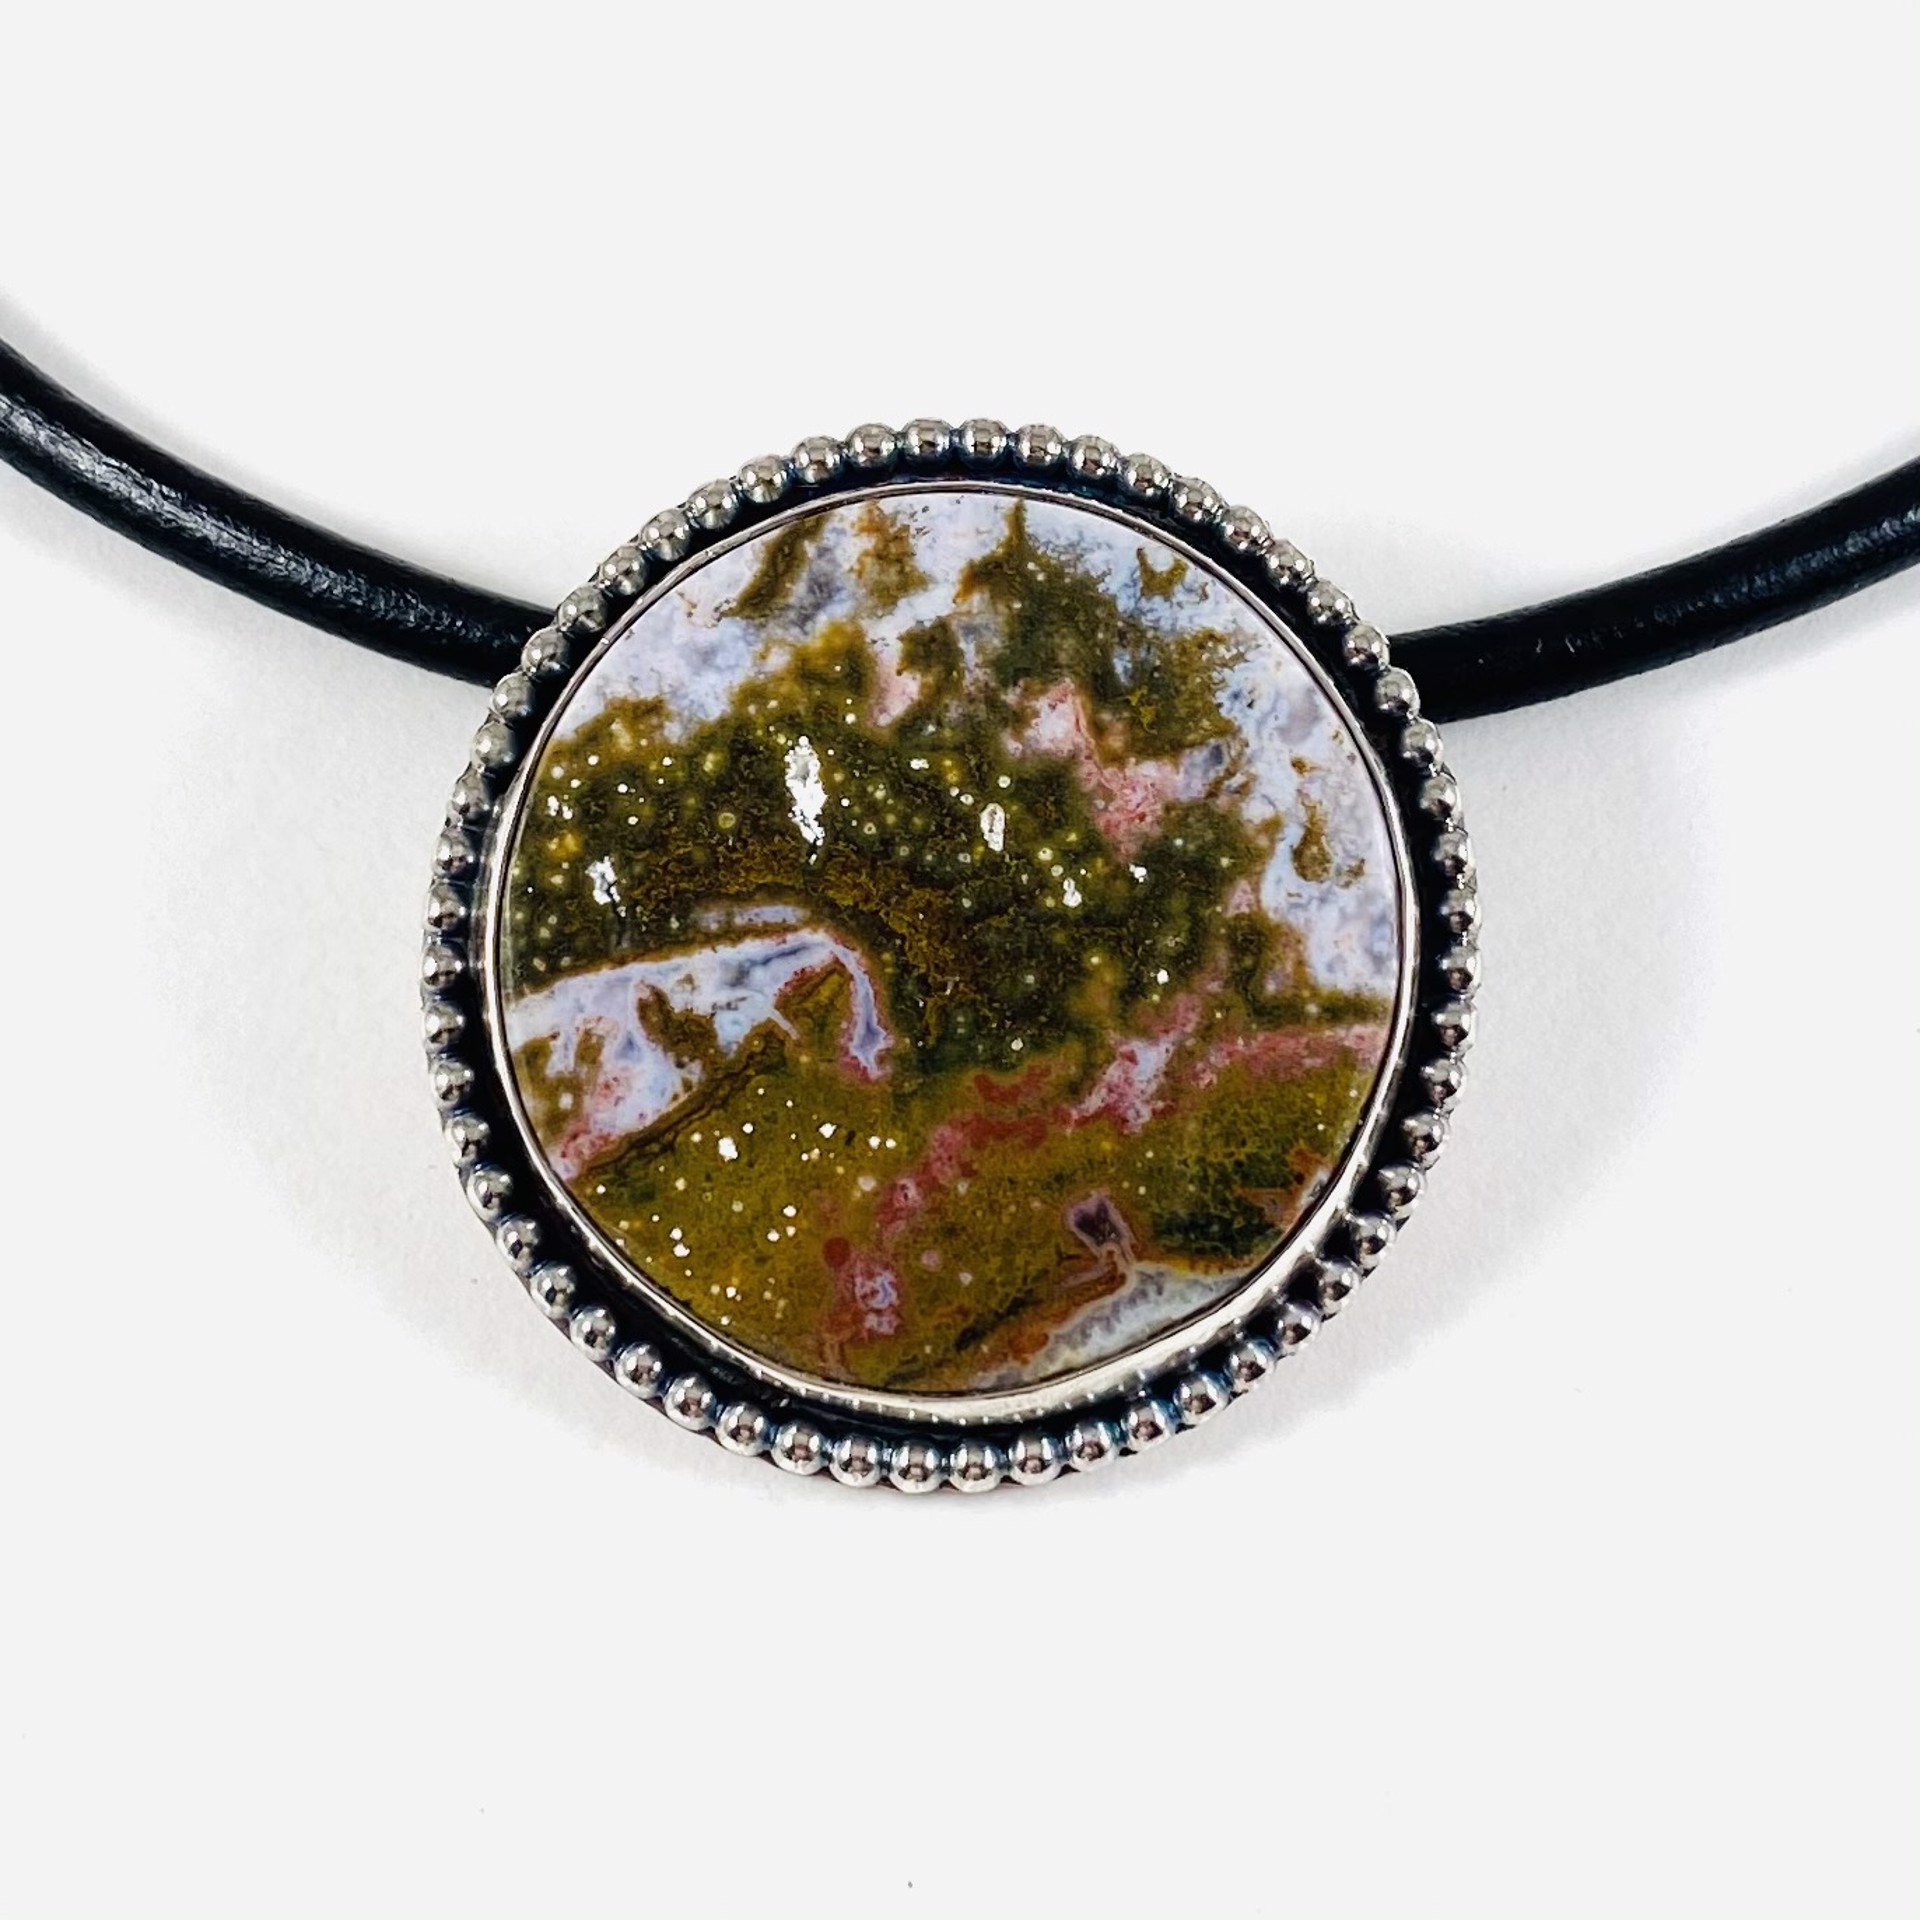 AB21-32 Ocean Jasper, Silver Pendant on leather by Anne Bivens